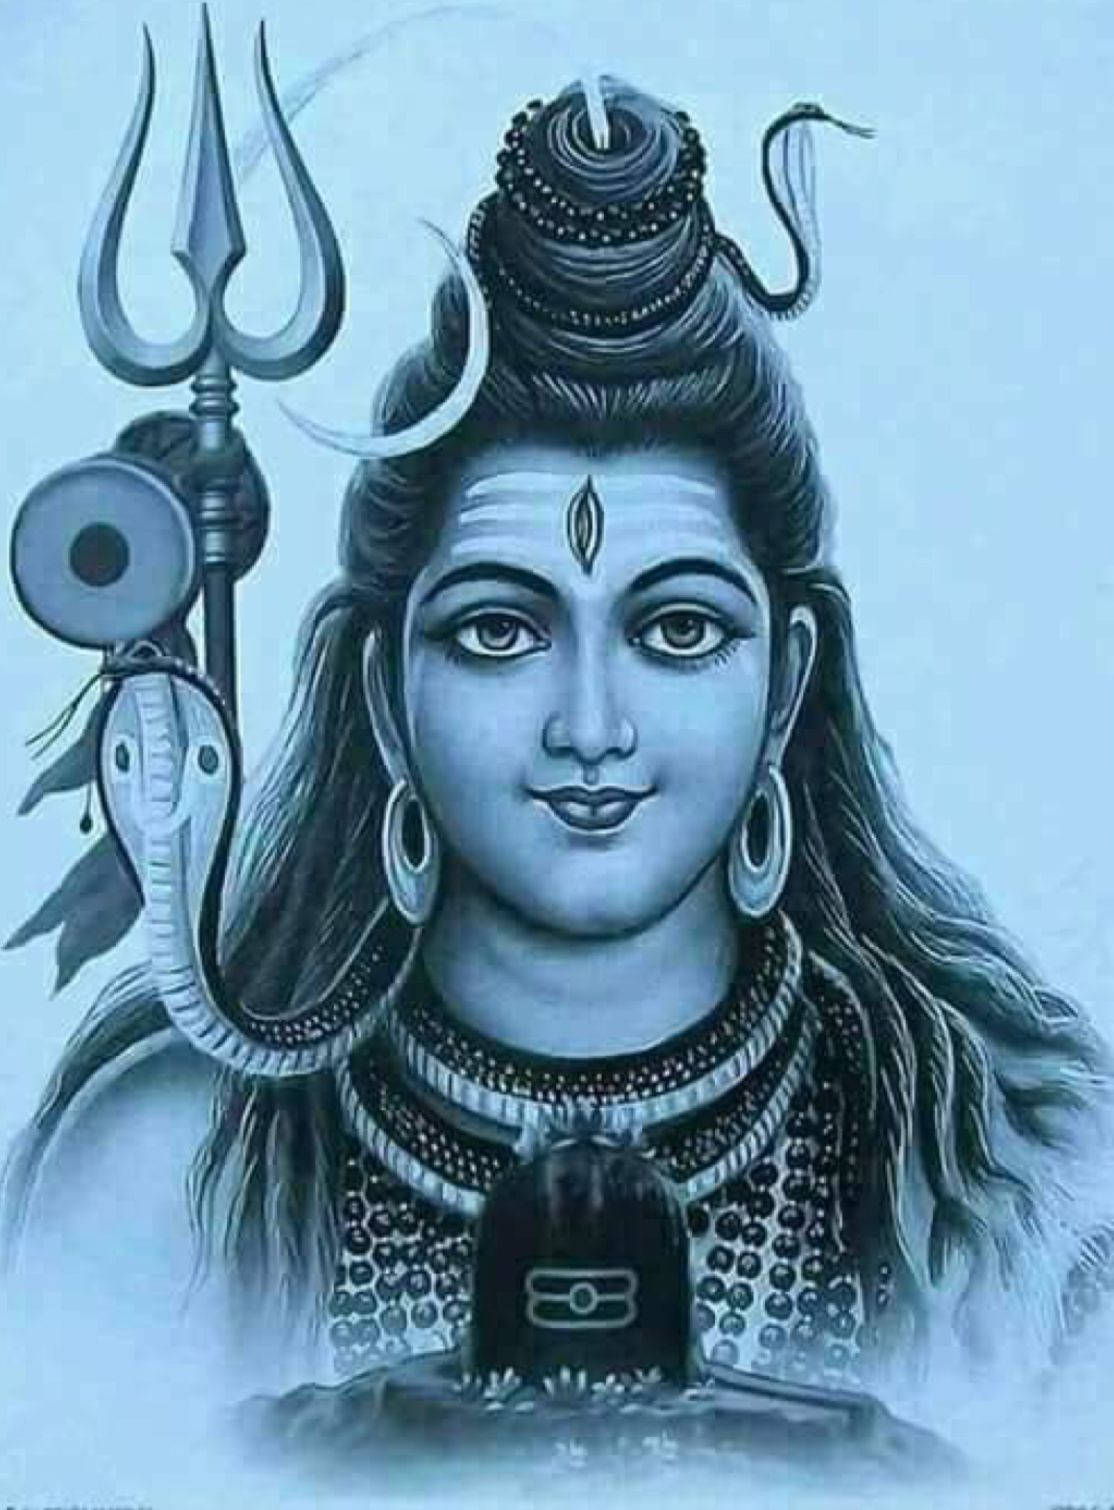 Download Lord Shiva Angry With Black Snake On Head Wallpaper | Wallpapers .com